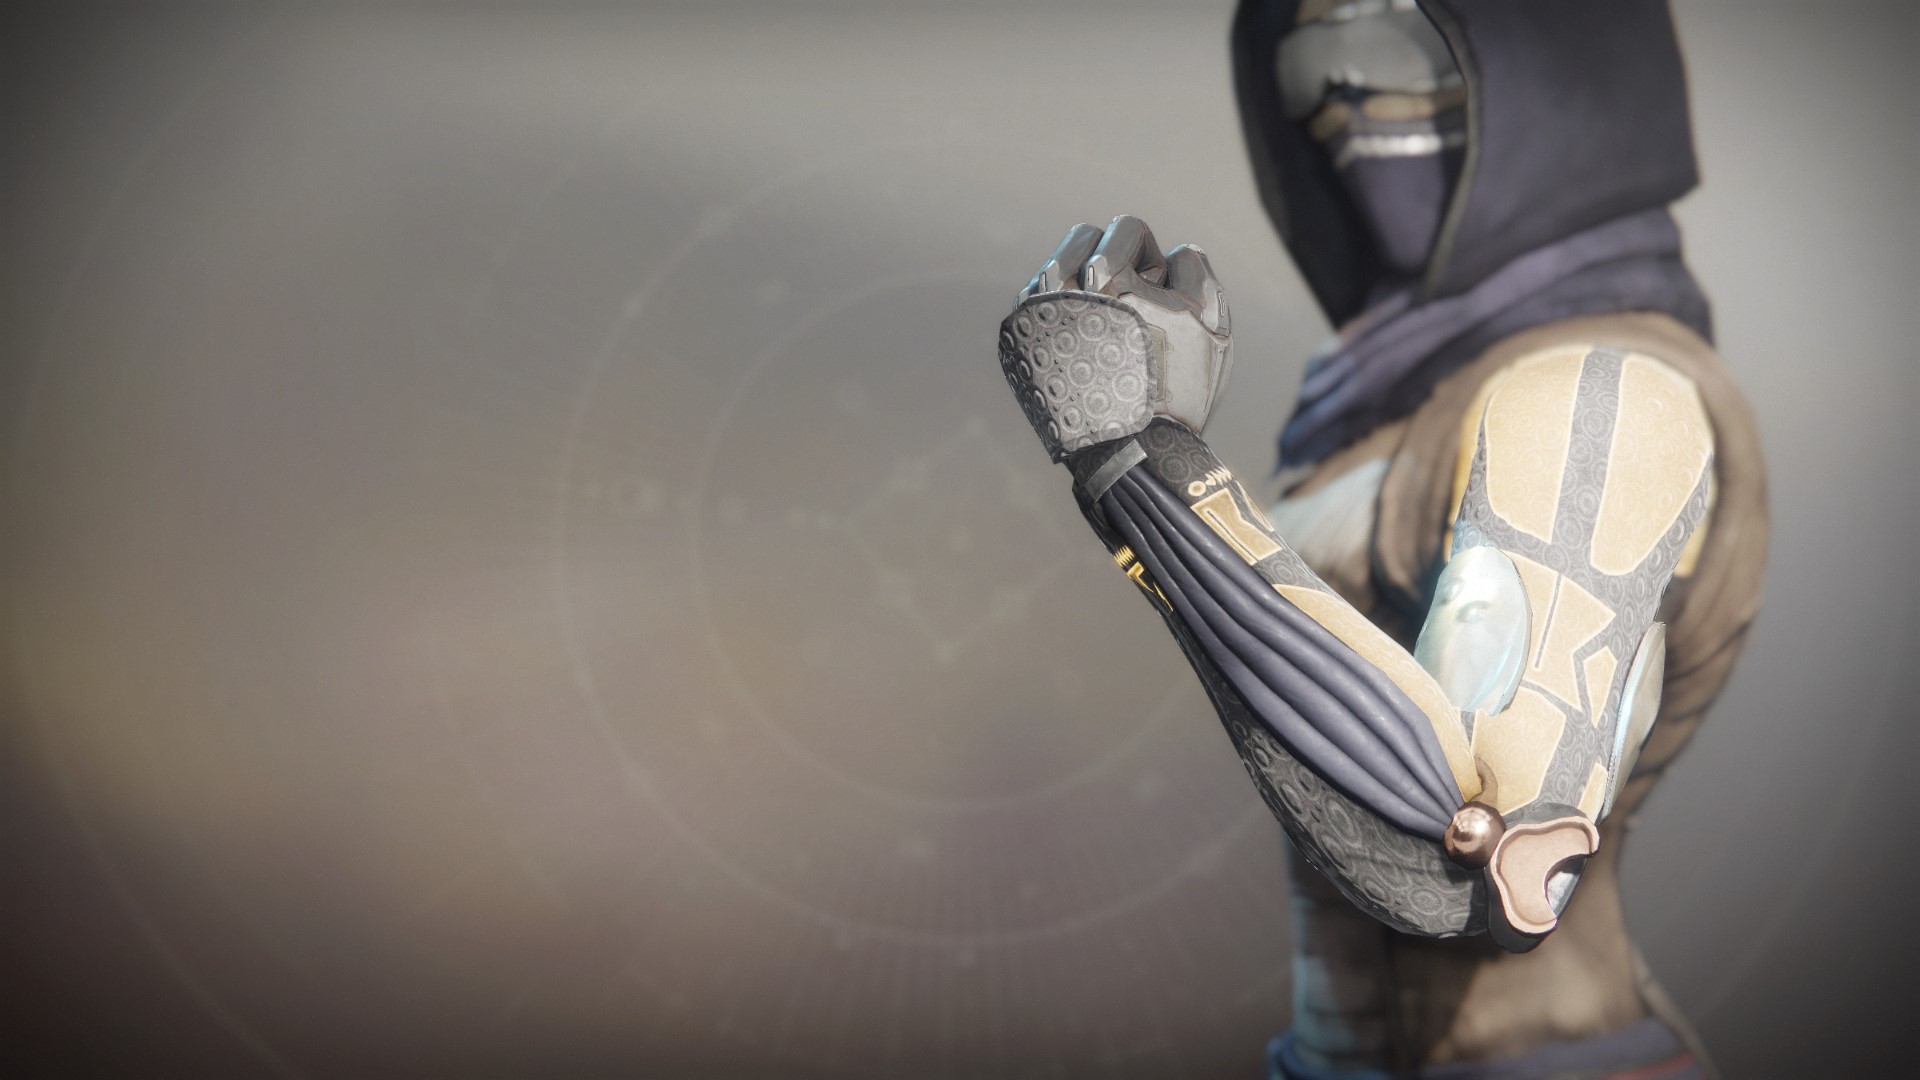 An in-game render of the Eater of Worlds Ornament.